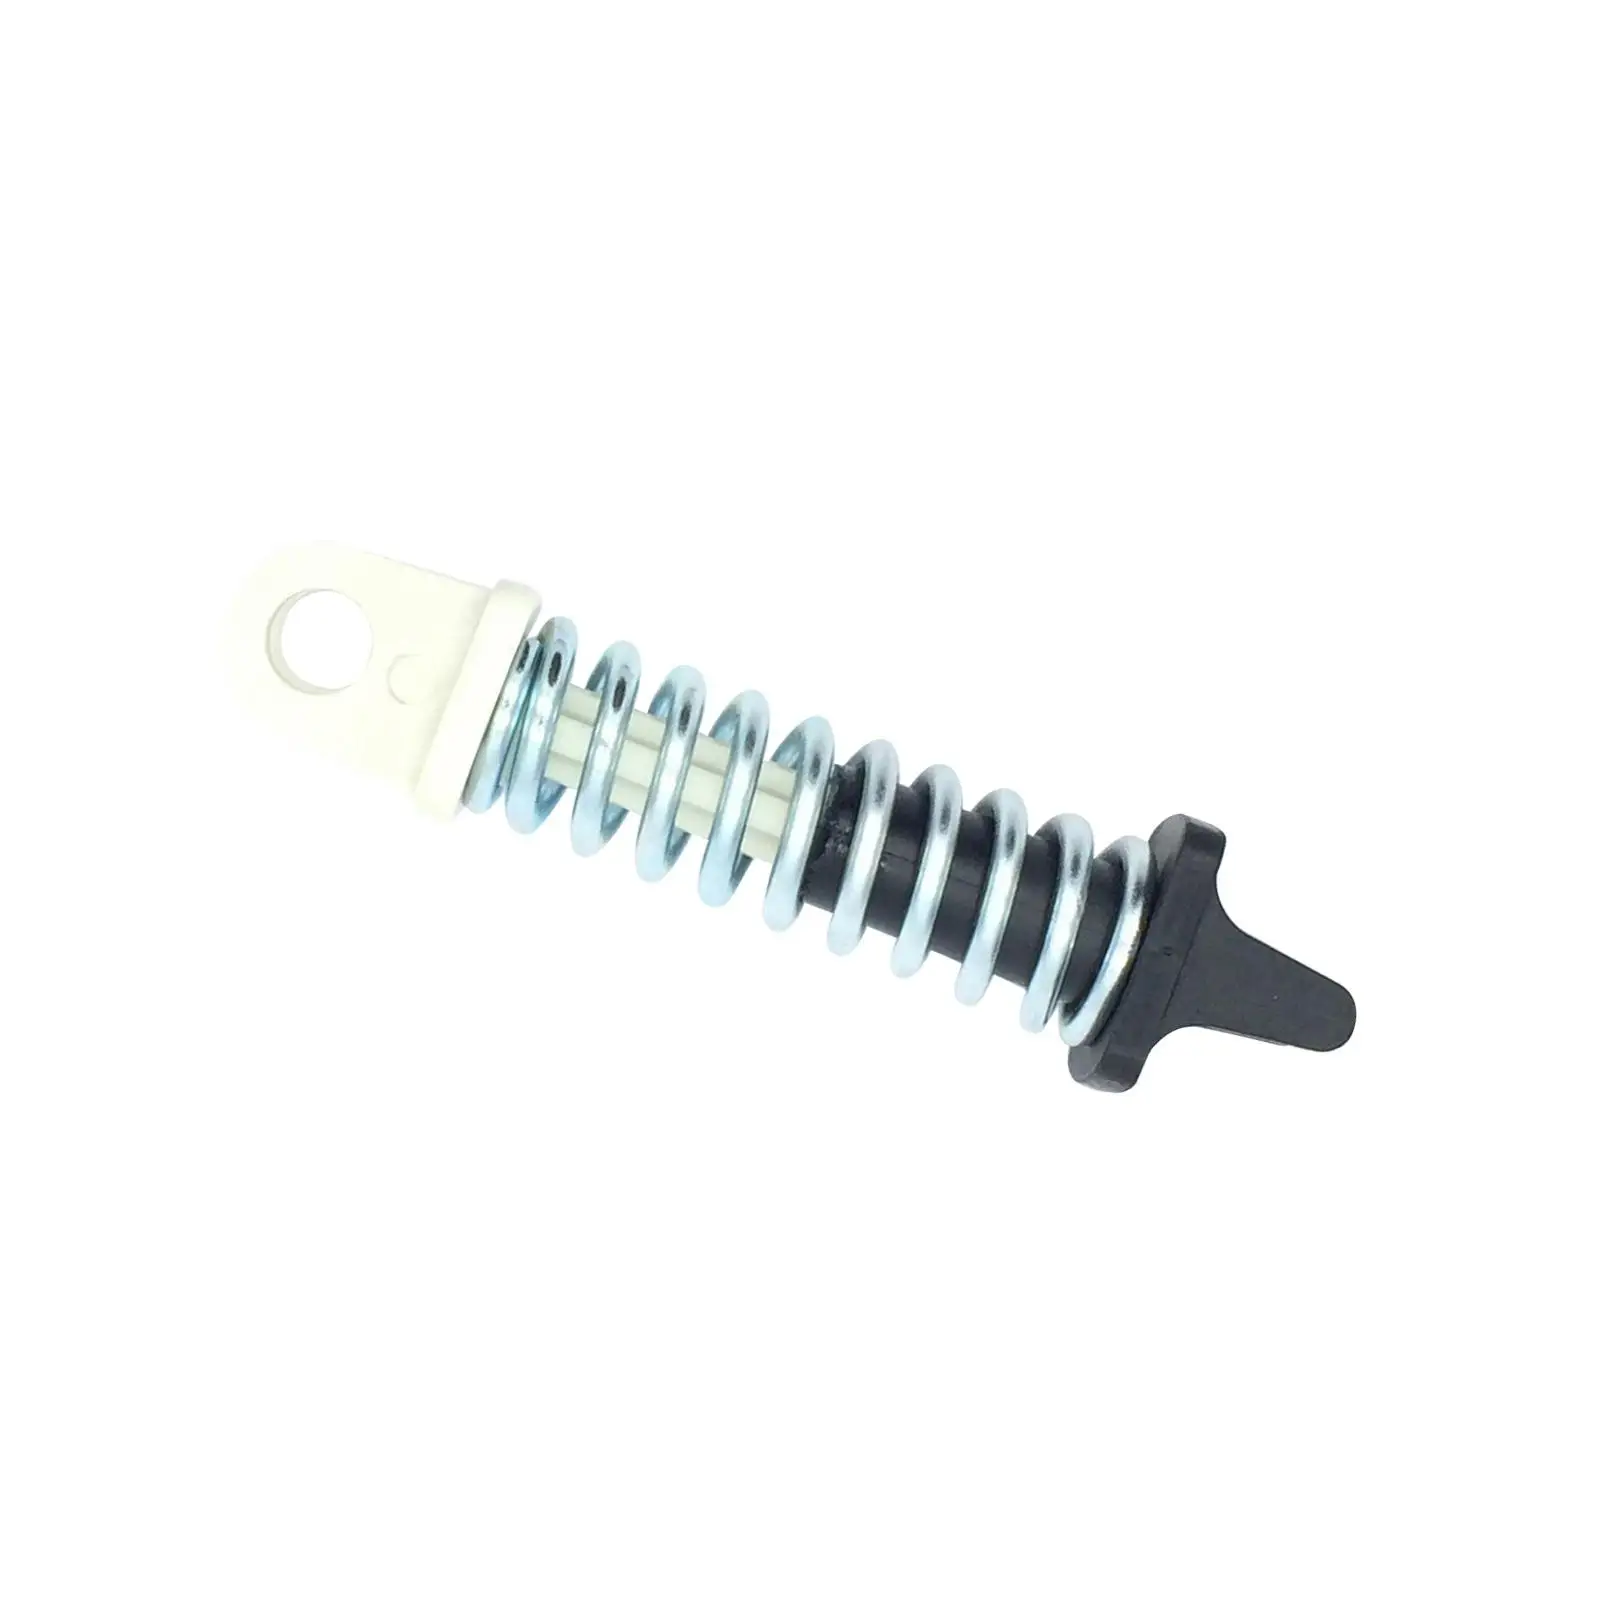 Clutch Pedal Assist Spring Clutch Pedal Spring Reset Repair Kit 77 01 208 109 for Renault Trafic II 2001-2014 Accessories